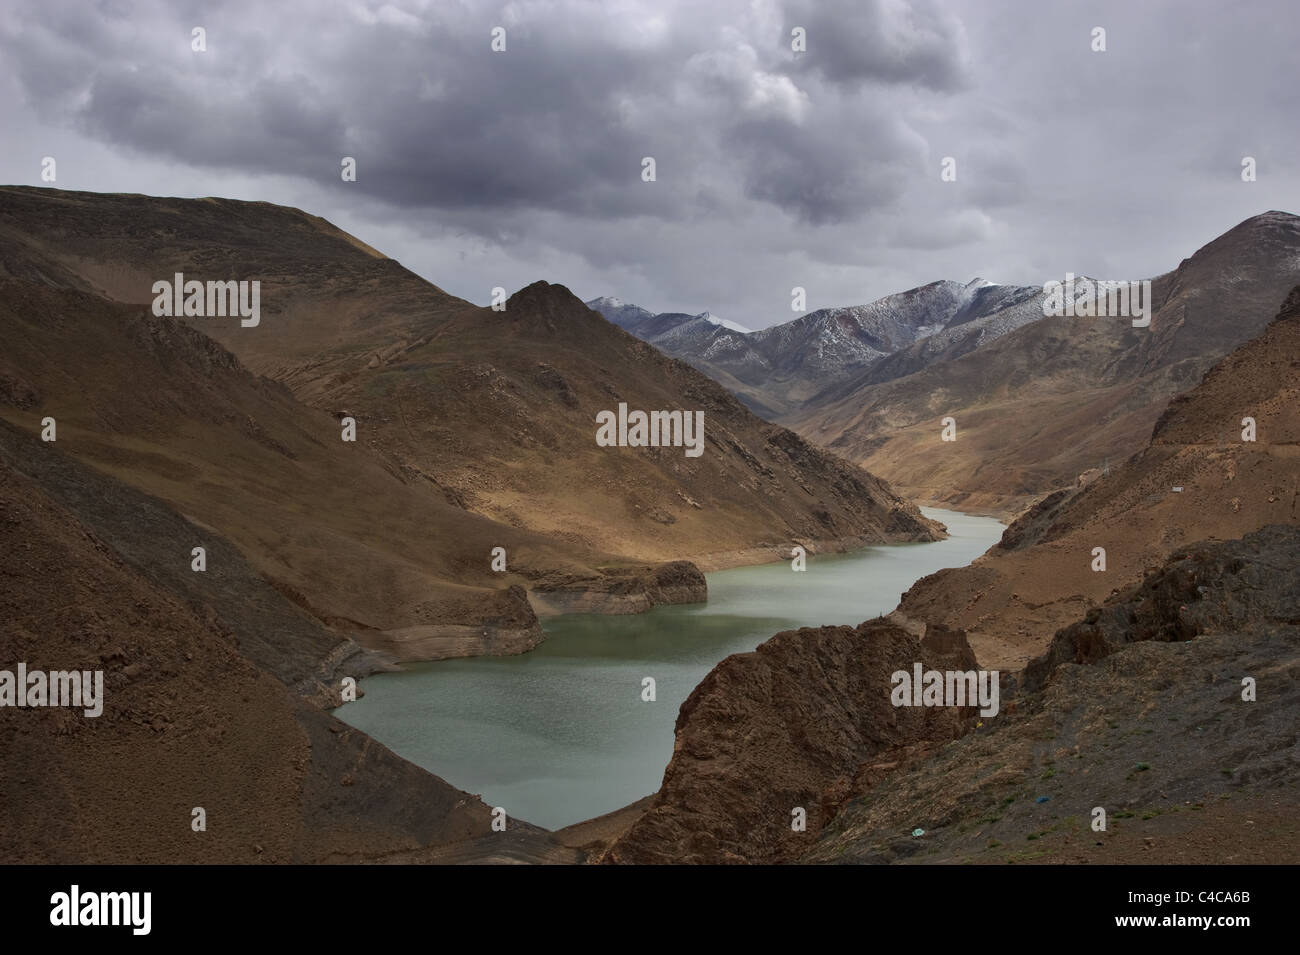 Landscape of Himalaya mountains and lake in Tibet in clouded weather Stock Photo